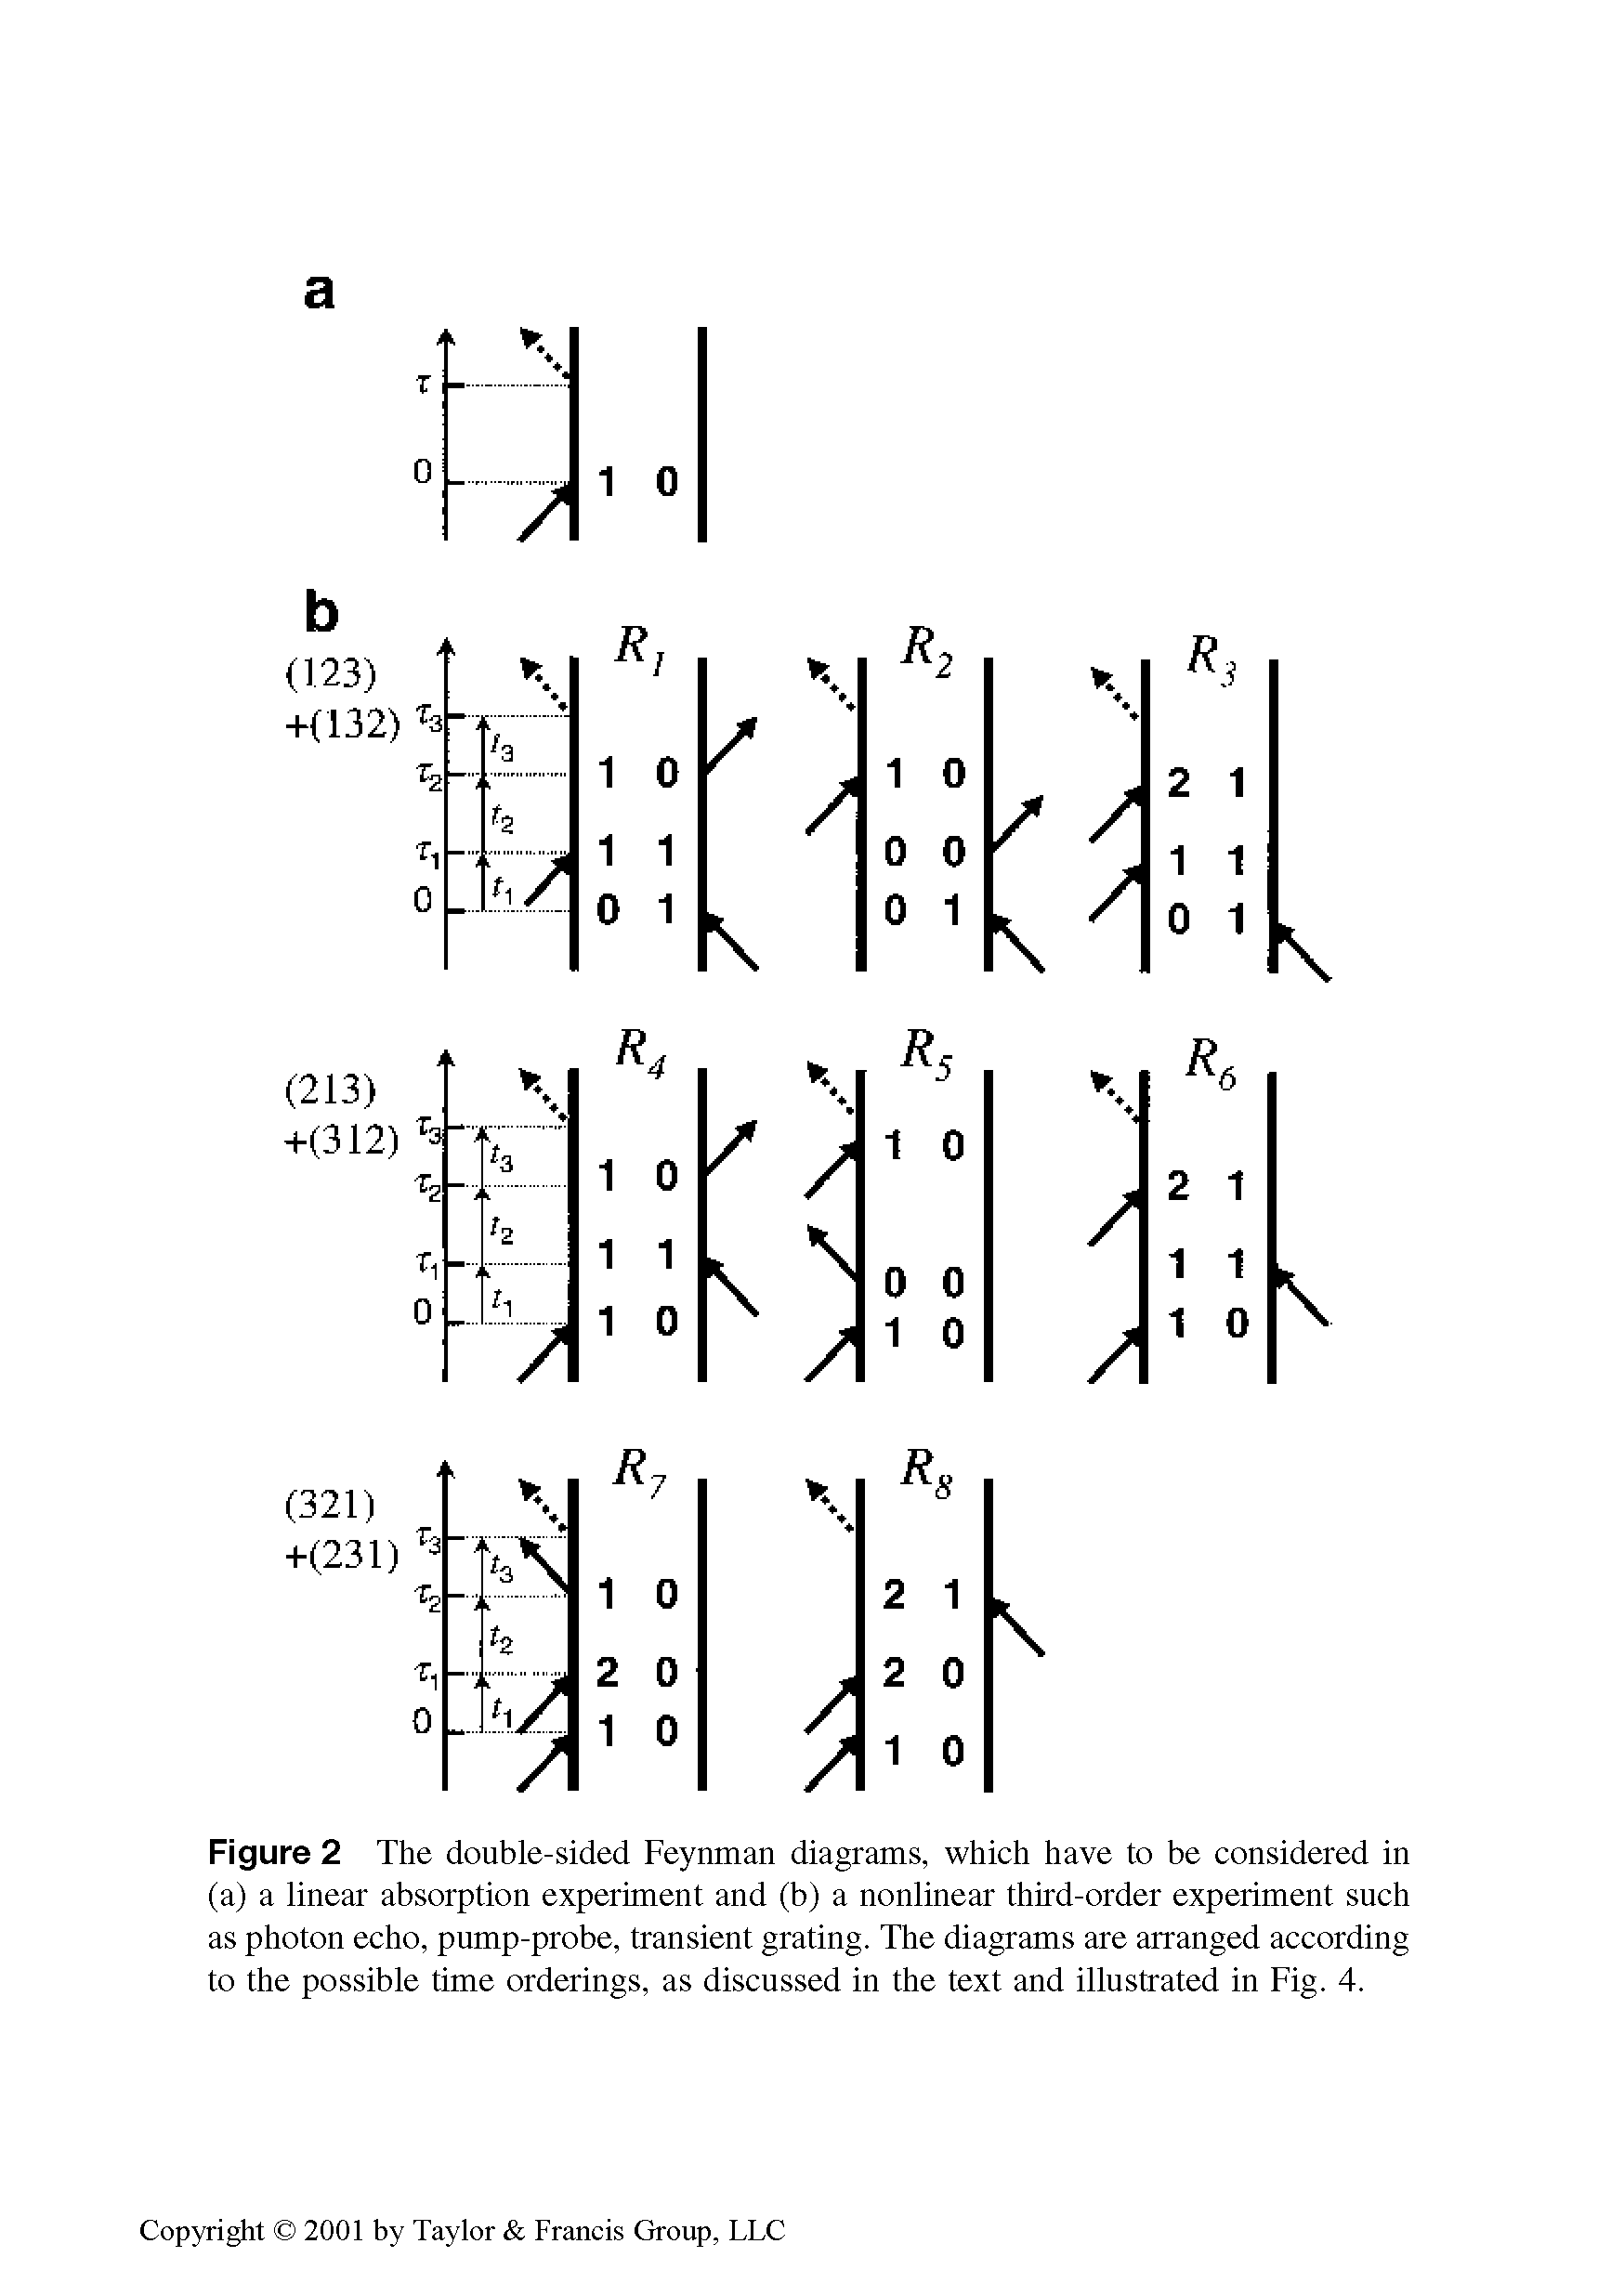 Figure 2 The double-sided Feynman diagrams, which have to be considered in (a) a linear absorption experiment and (b) a nonlinear third-order experiment such as photon echo, pump-probe, transient grating. The diagrams are arranged according to the possible time orderings, as discussed in the text and illustrated in Fig. 4.